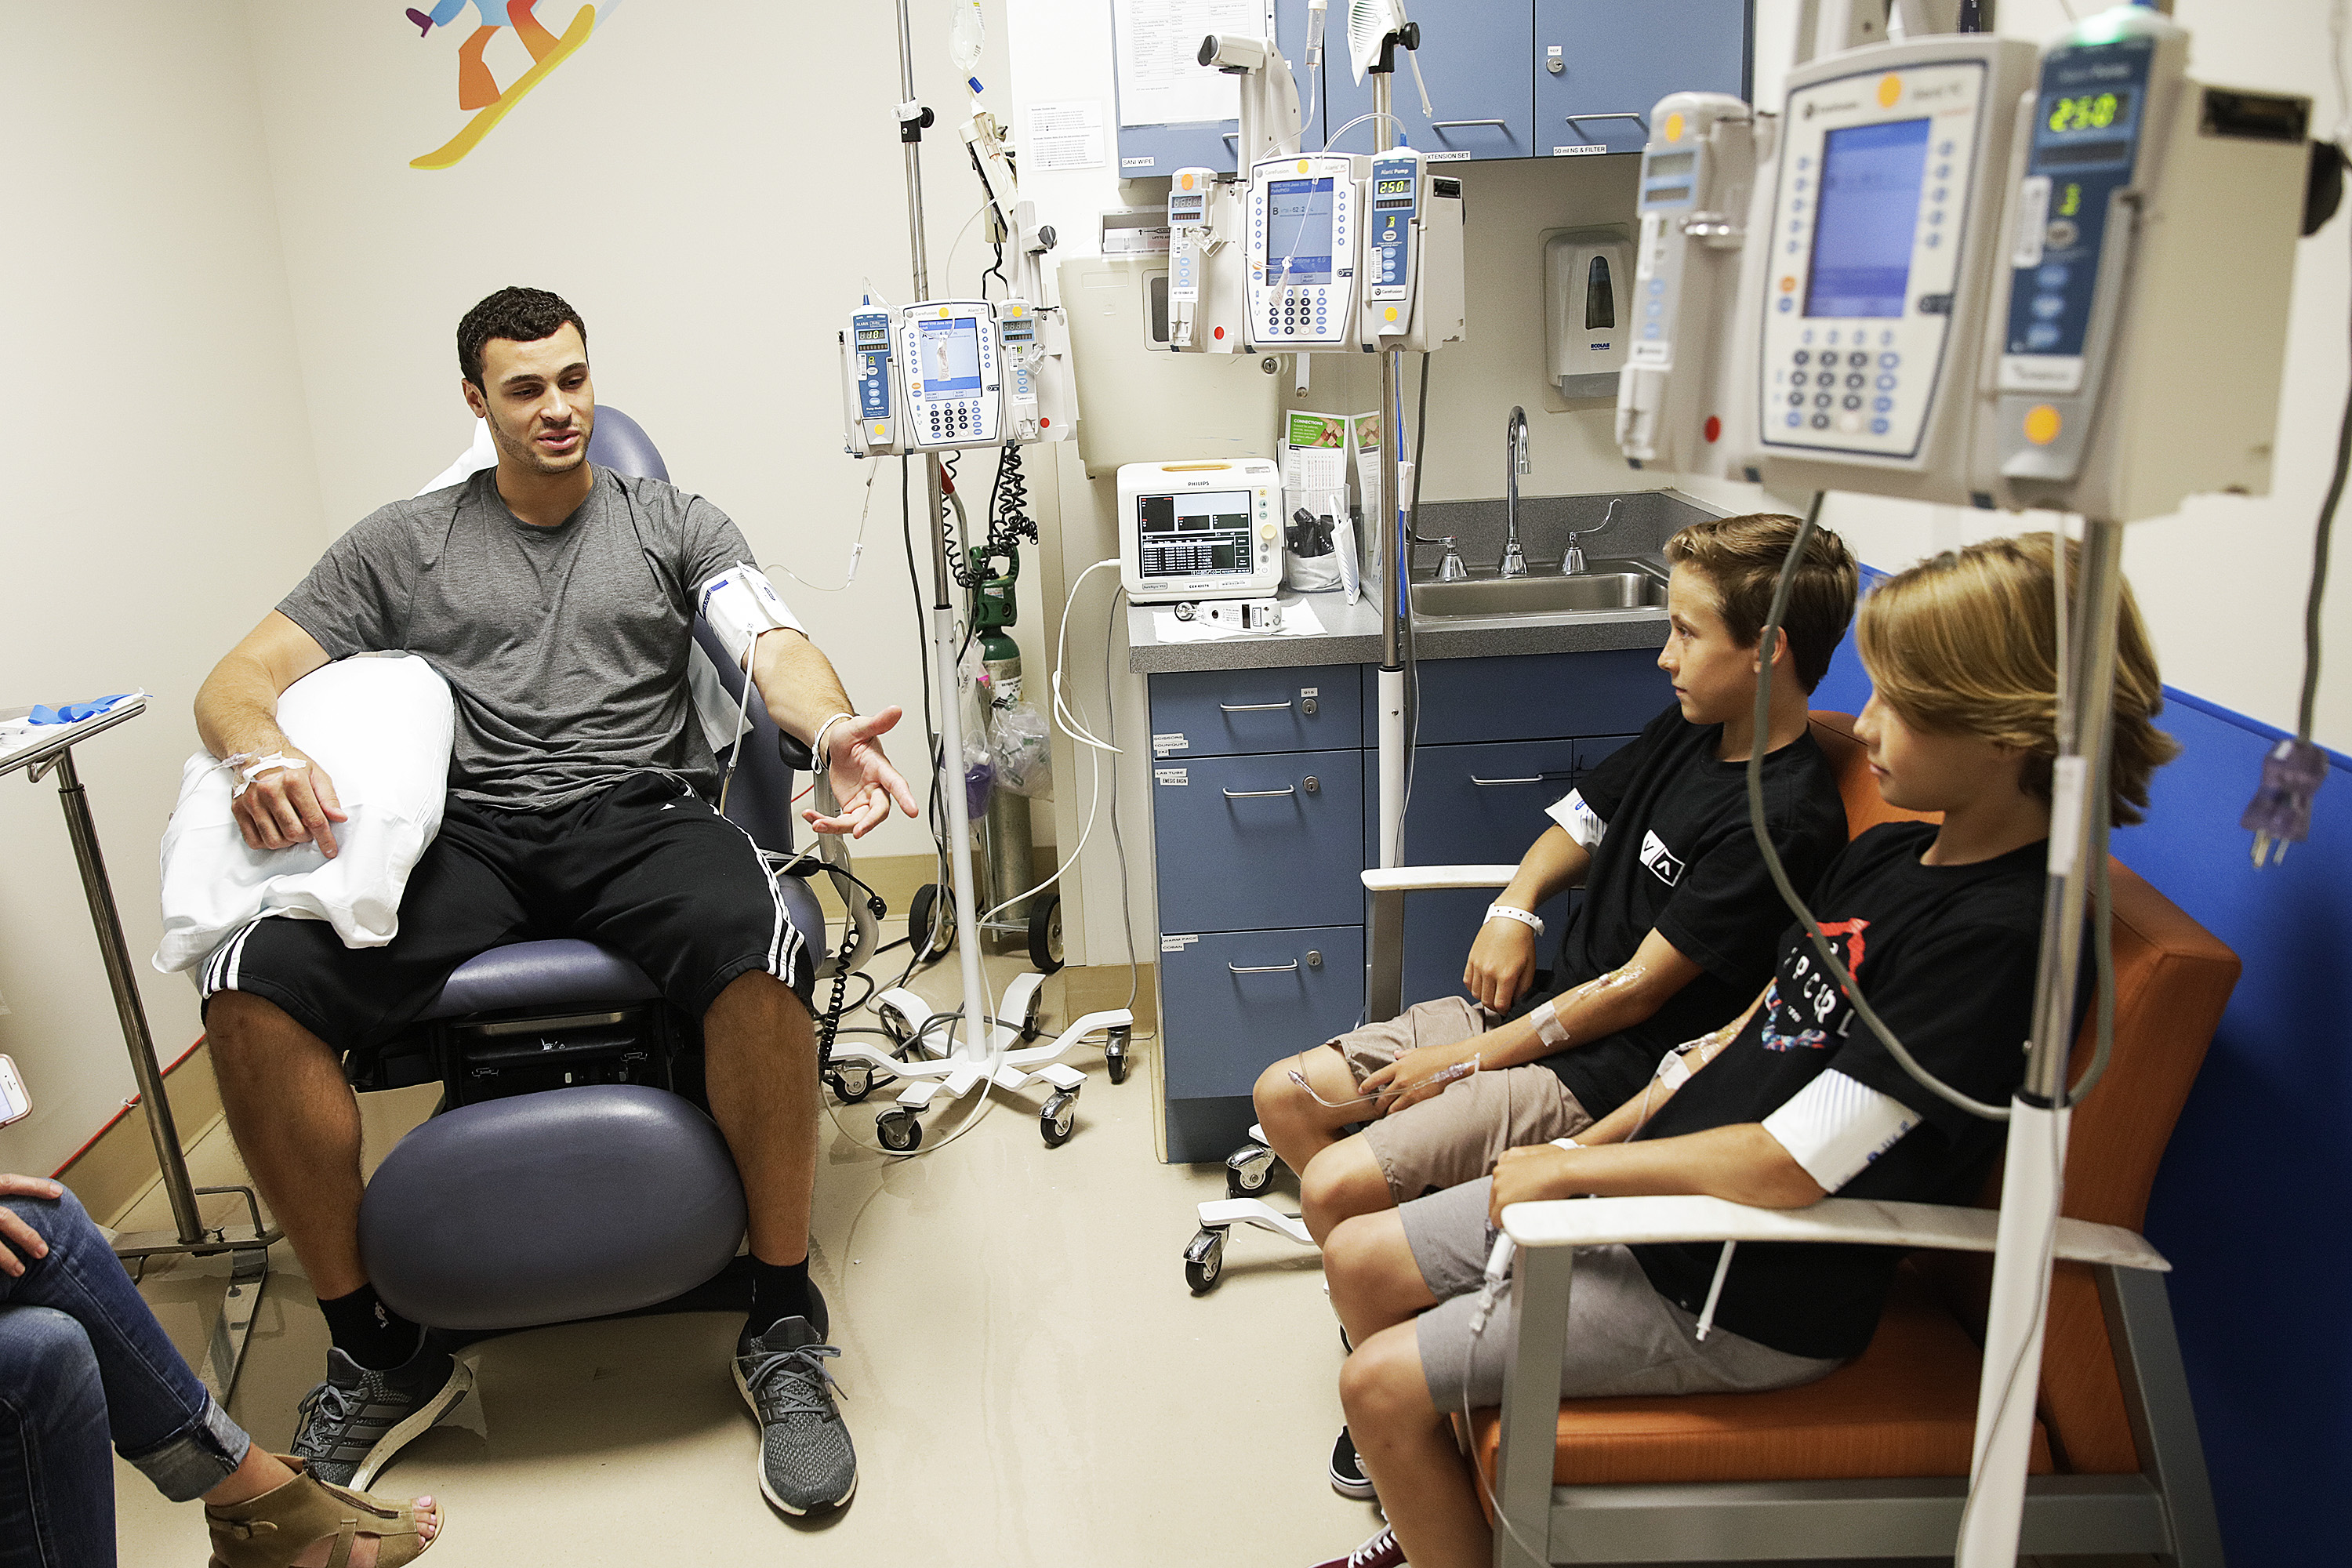 Lakers forward Larry Nance Jr. visited with patients at Cedars-Sinai on Wednesday. Photo credit: Al Cuizon/Cedas-Sinai